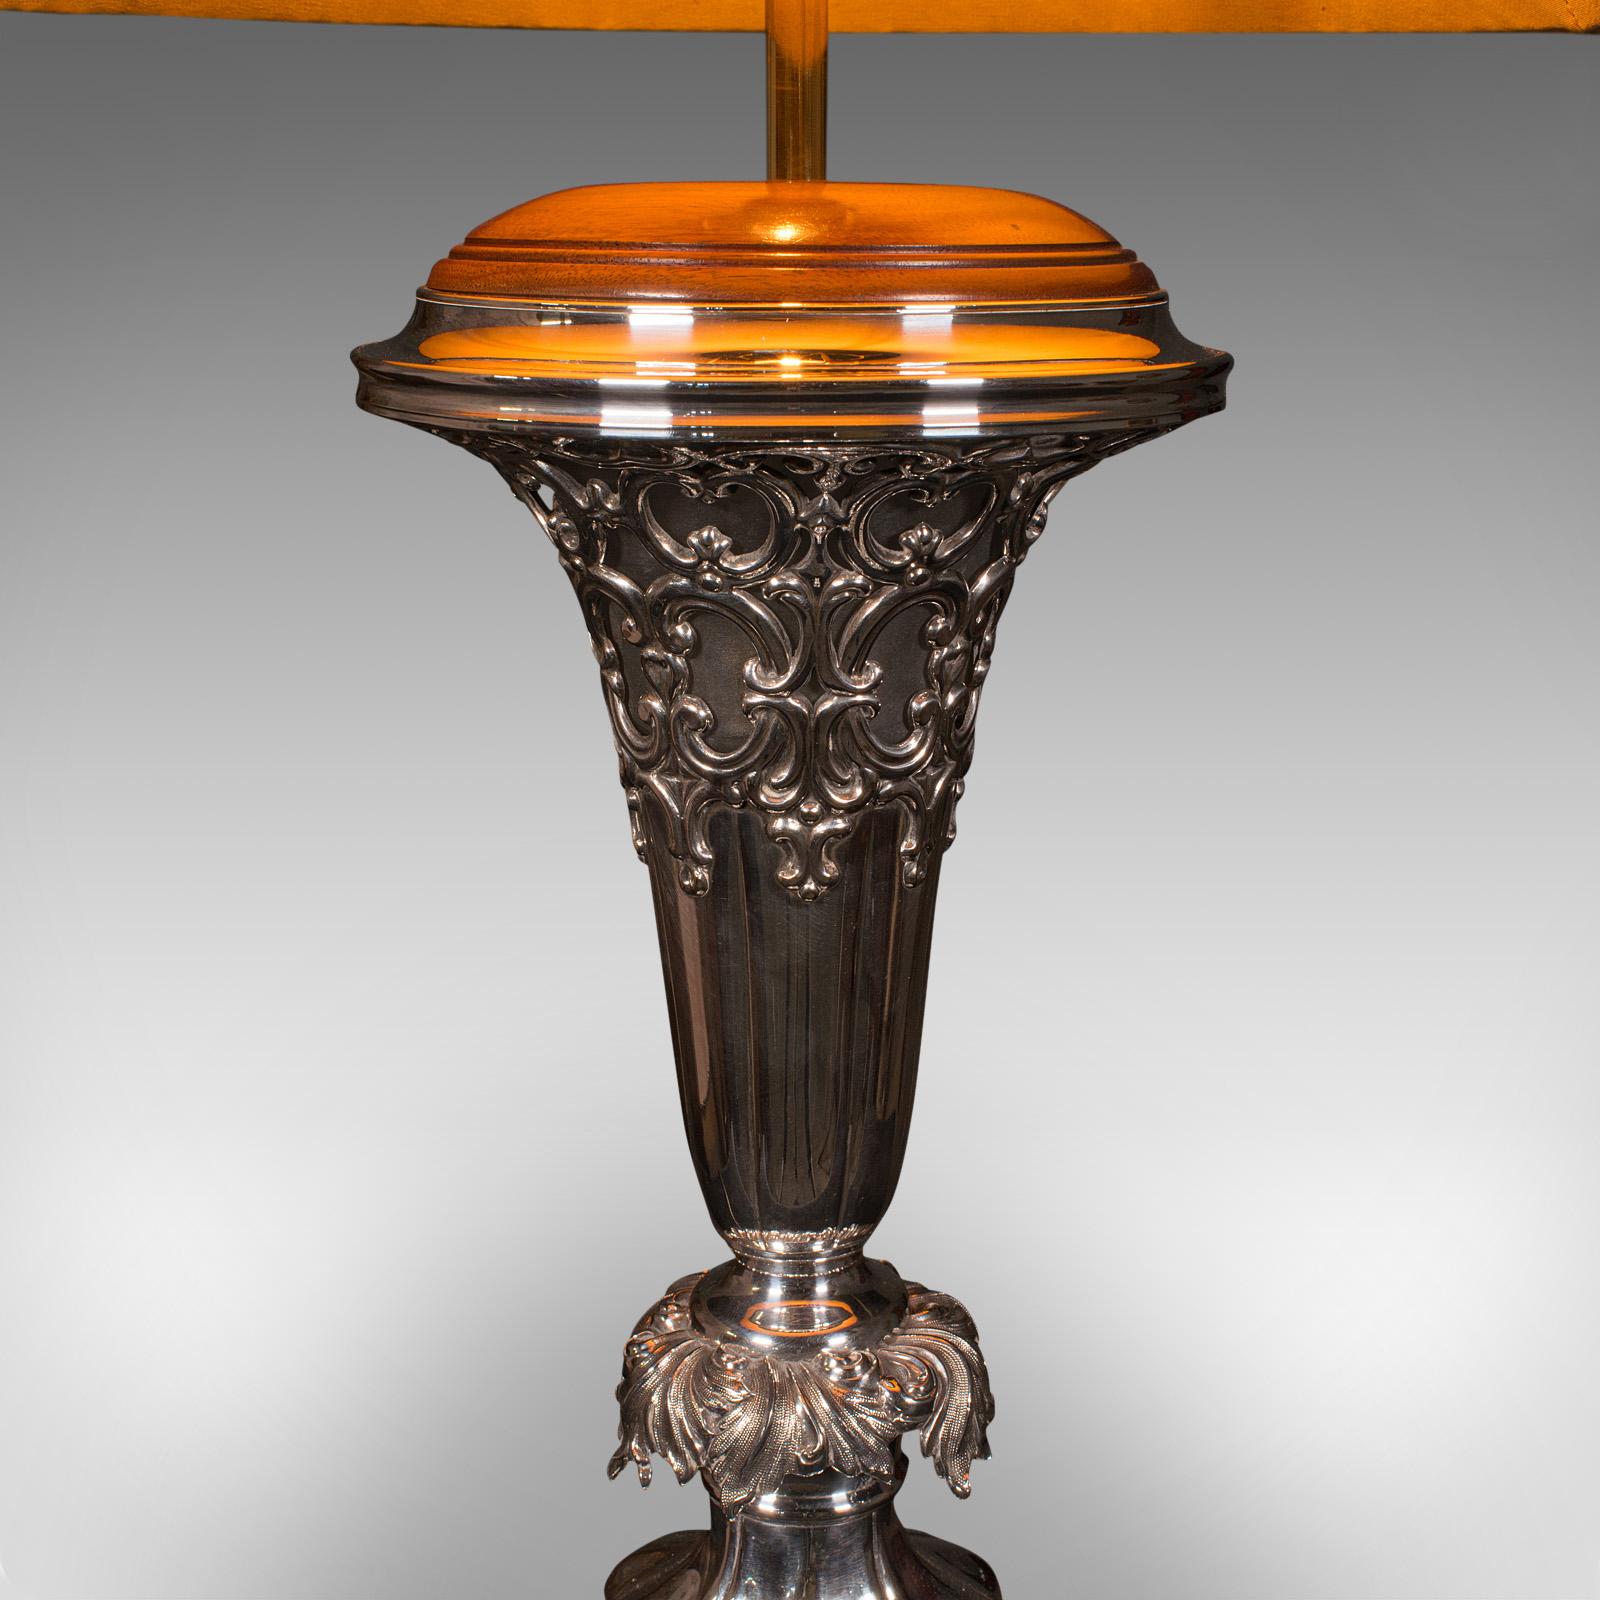 Large Antique Table Lamp, English Silver Plate, Walnut, Light, Victorian, C.1900 For Sale 4